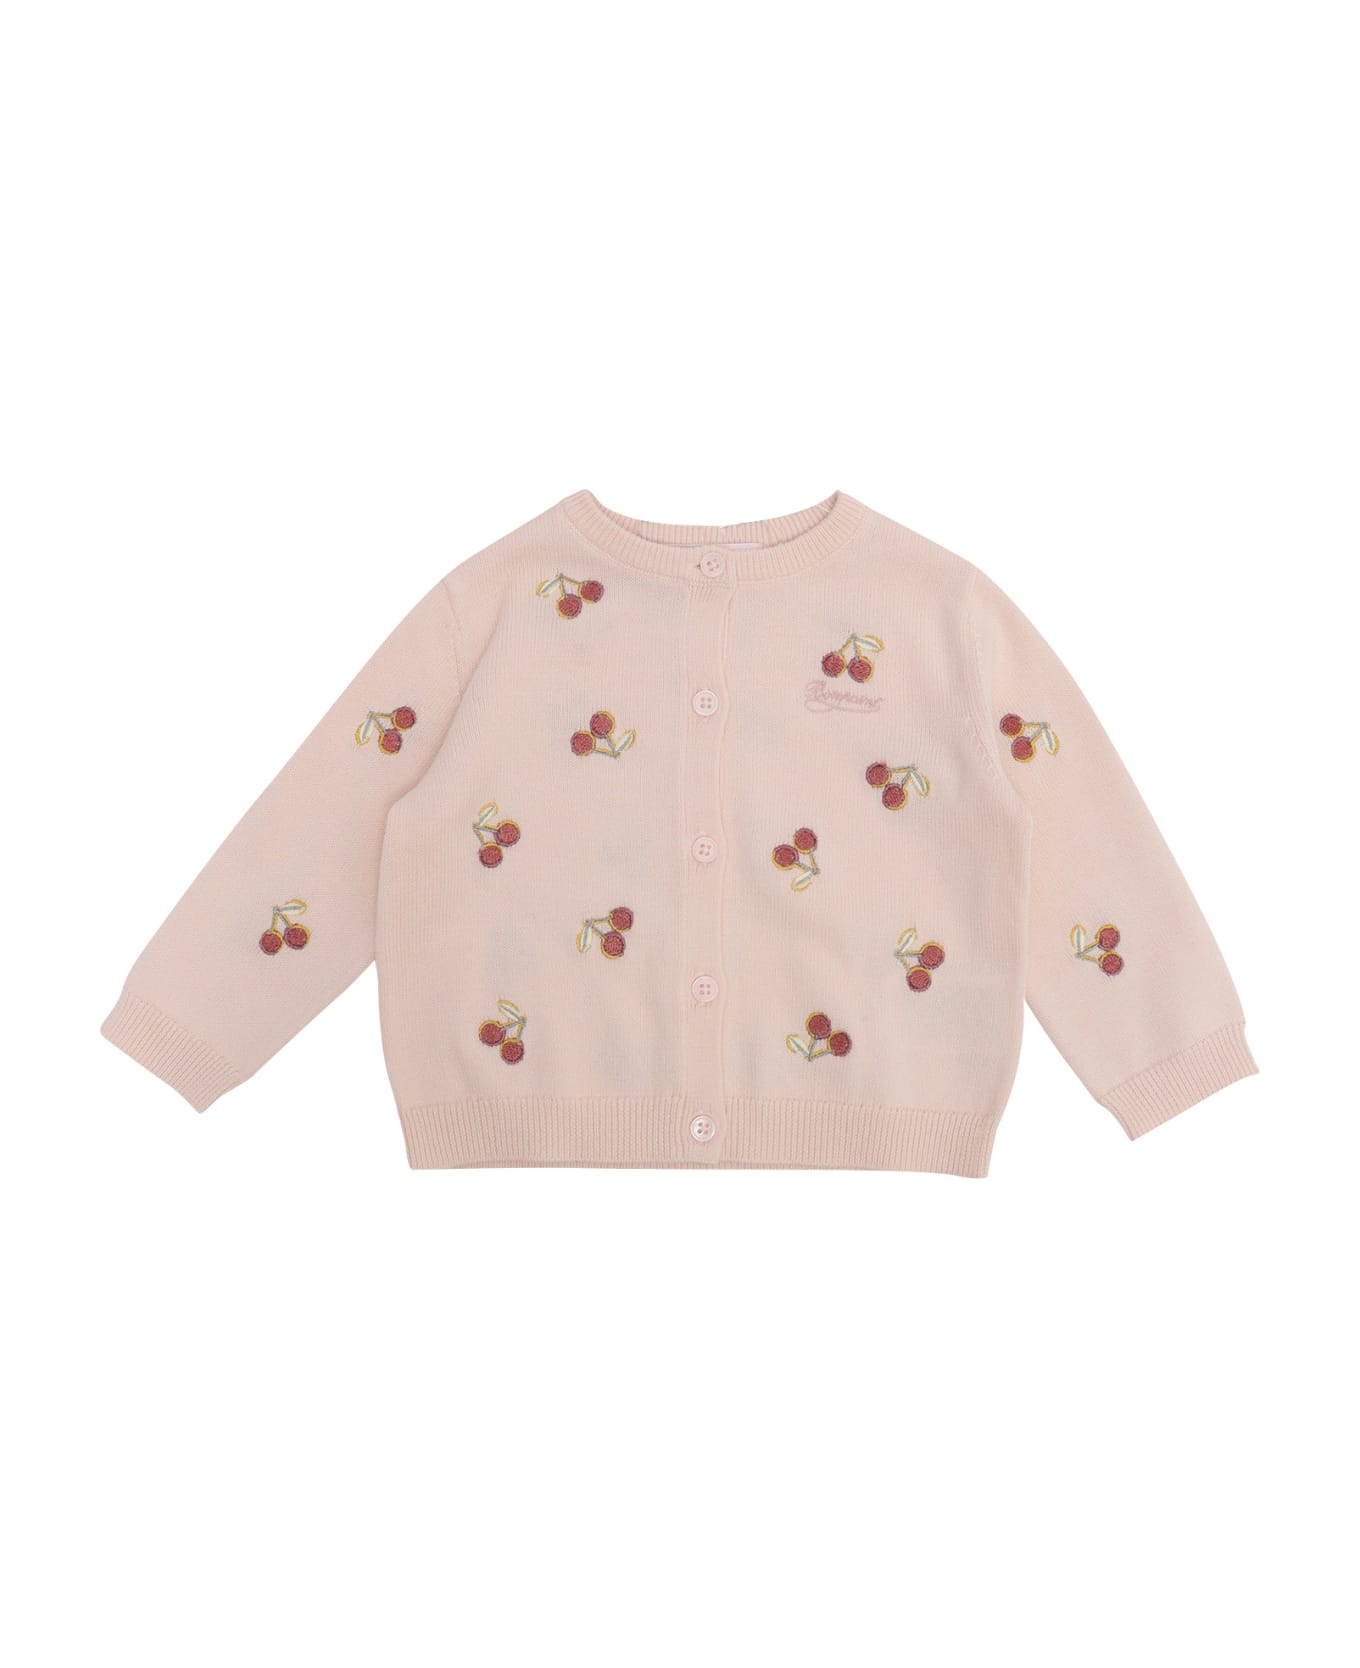 Bonpoint Girl's Cardigan With Cherries - PINK